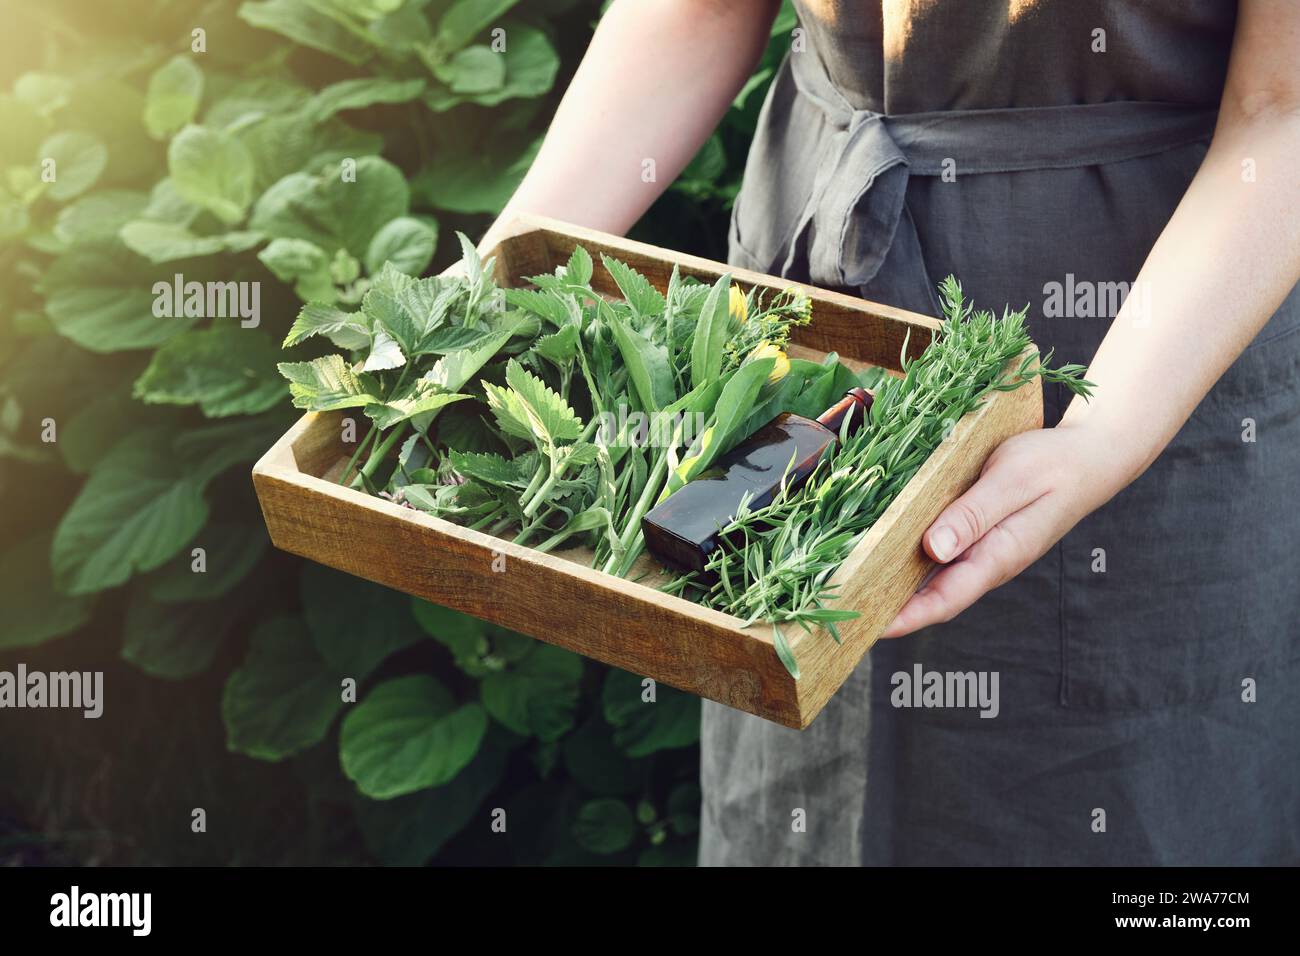 Woman holding in her hands wooden crate filled of medicinal plants.  Herbalist collects healthy herbs on a meadow. Herbalism, alternative herbal medic Stock Photo